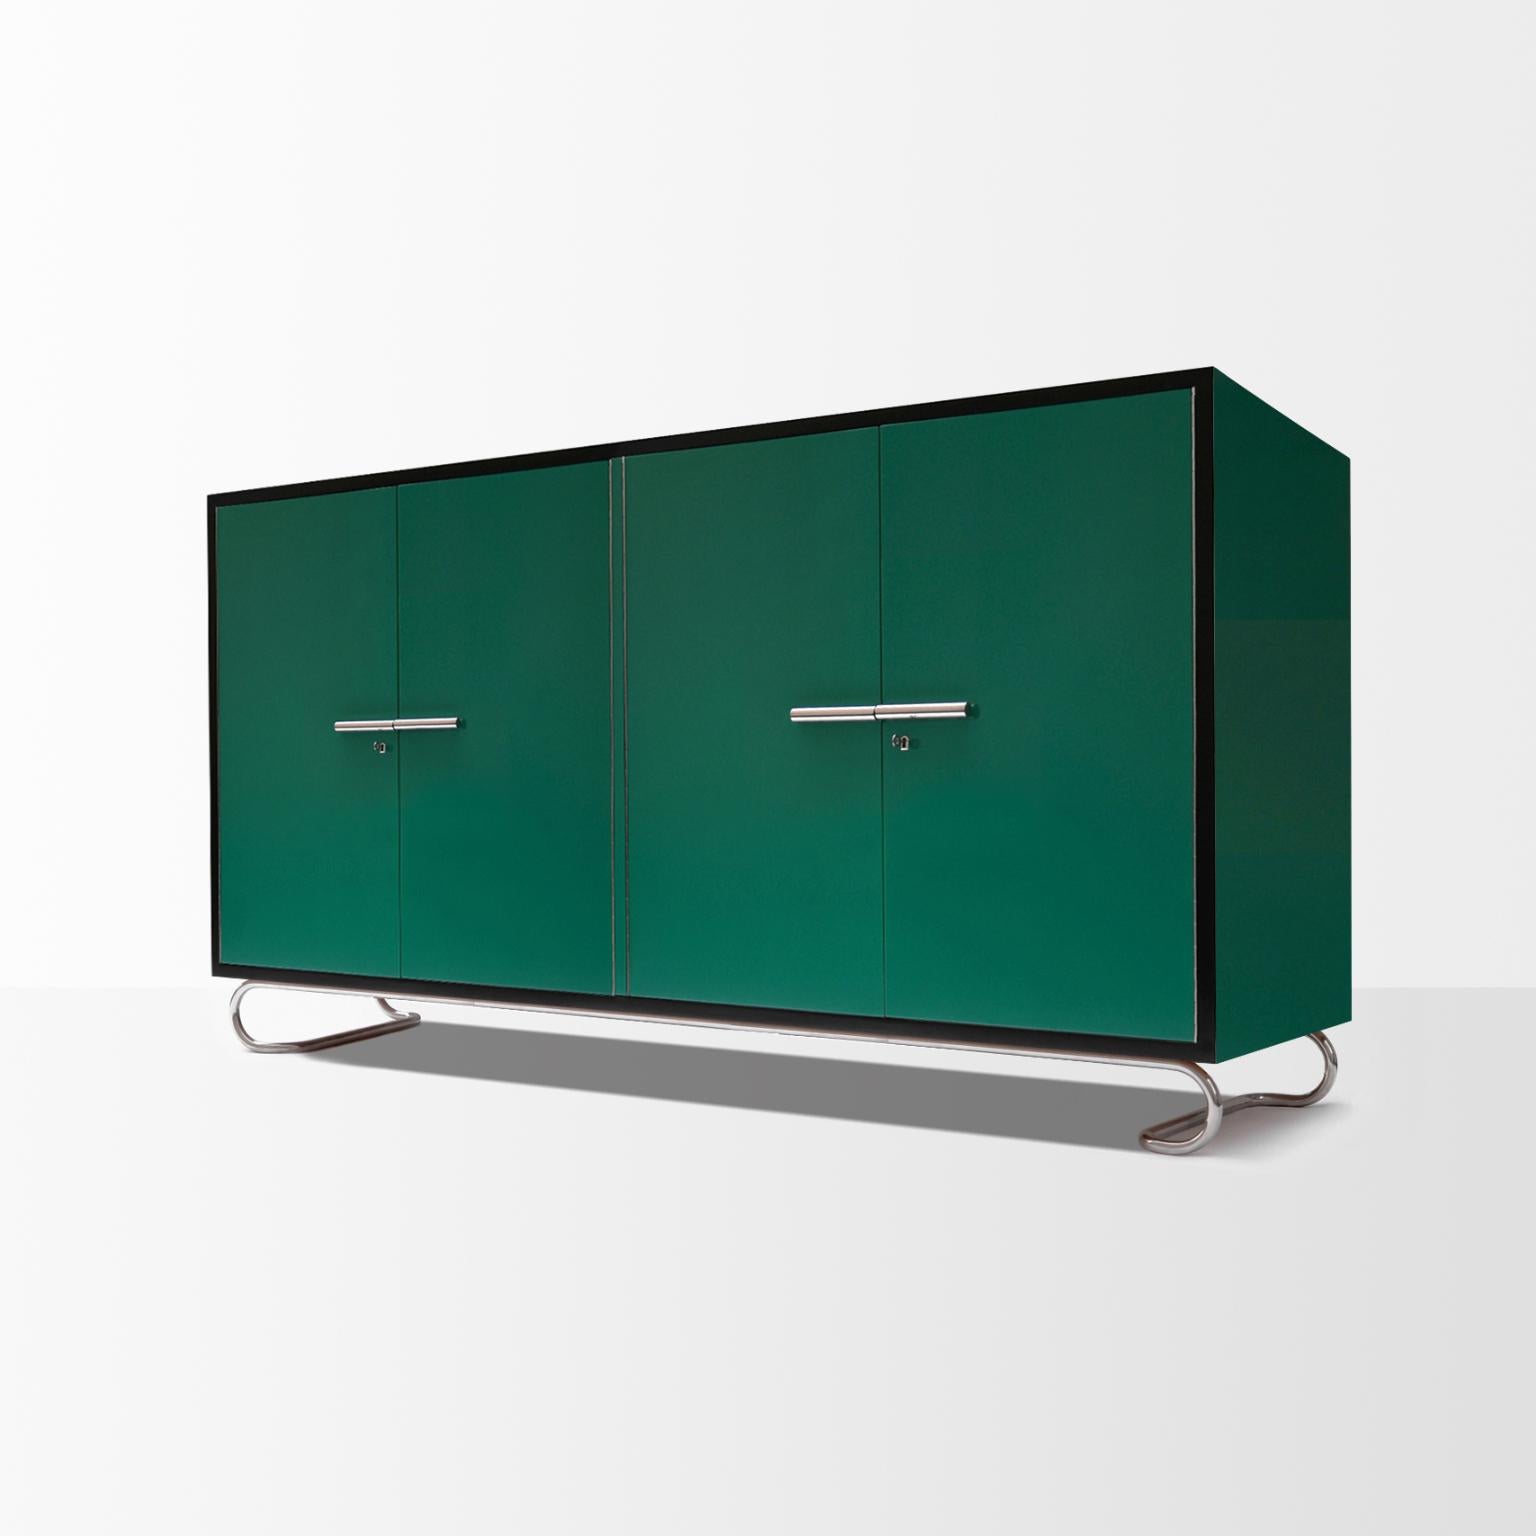 Modernist rectangular 4-door 'Dahlem' credenza designed by GMD Berlin - Studio and manufactured by GMD Berlin. Handcrafted wood with lacquerer finish, chrome-plated tubular steel base and handles.

Available on request in different colors, finish